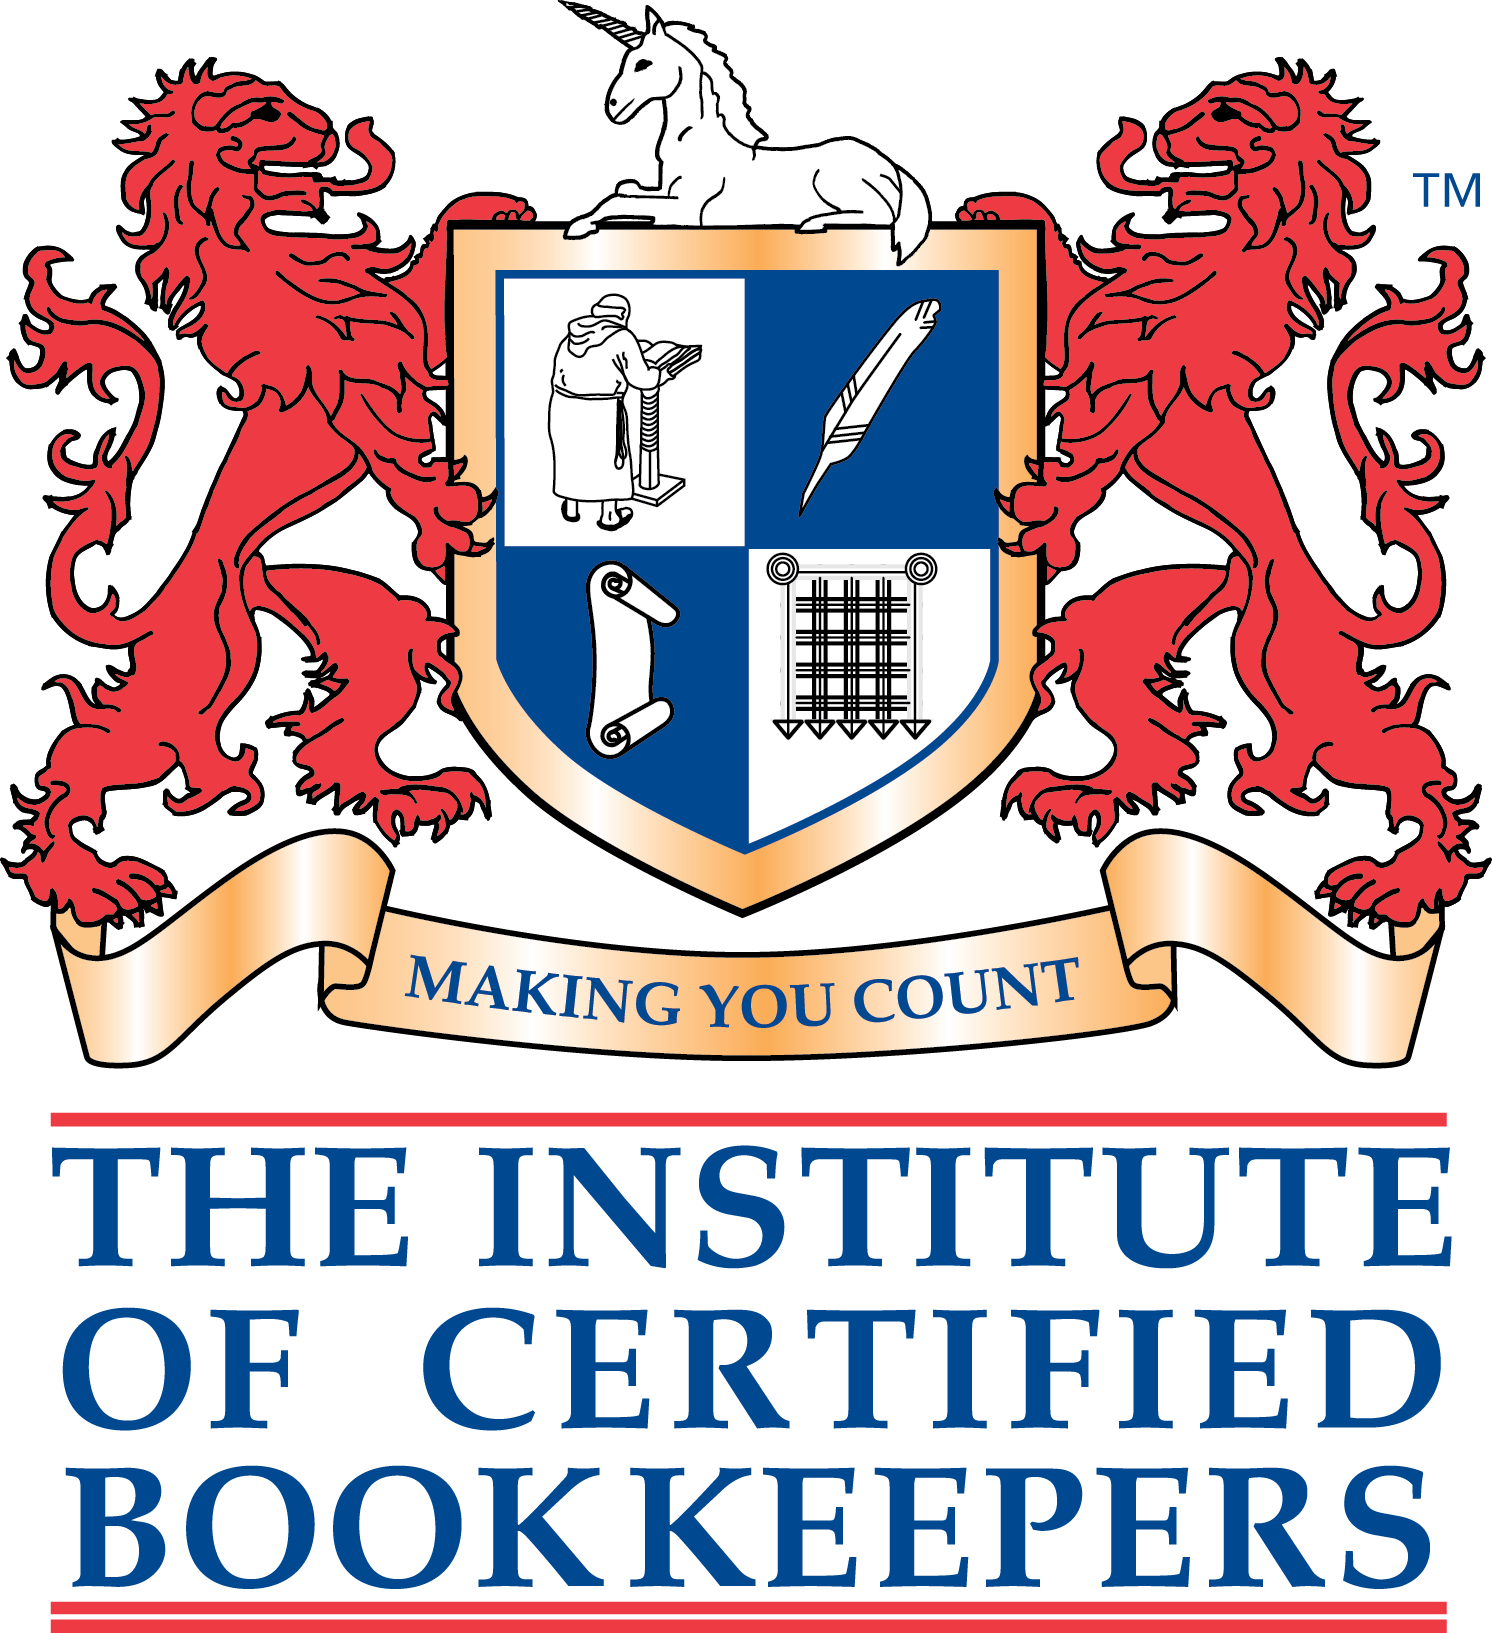 We are members of The Institute of Certified Bookkeepers Practise License Number 22693